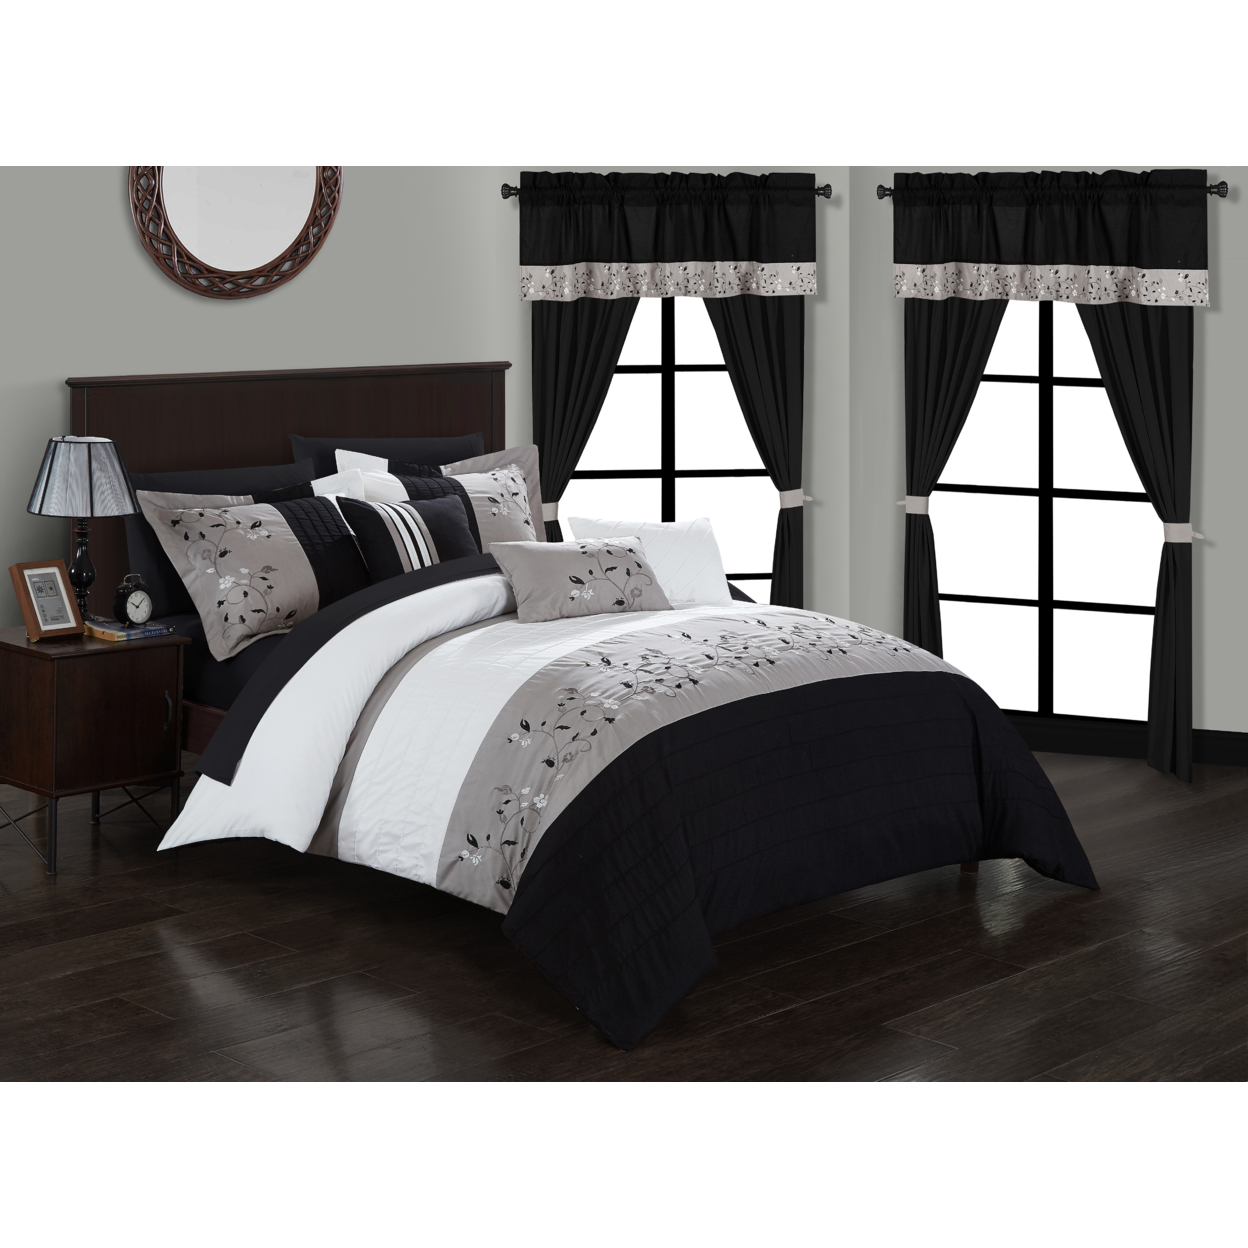 Sonita 20-Piece Bedding Set With Comforter, Sheets & Curtains, Mult. Colors - Brown, King